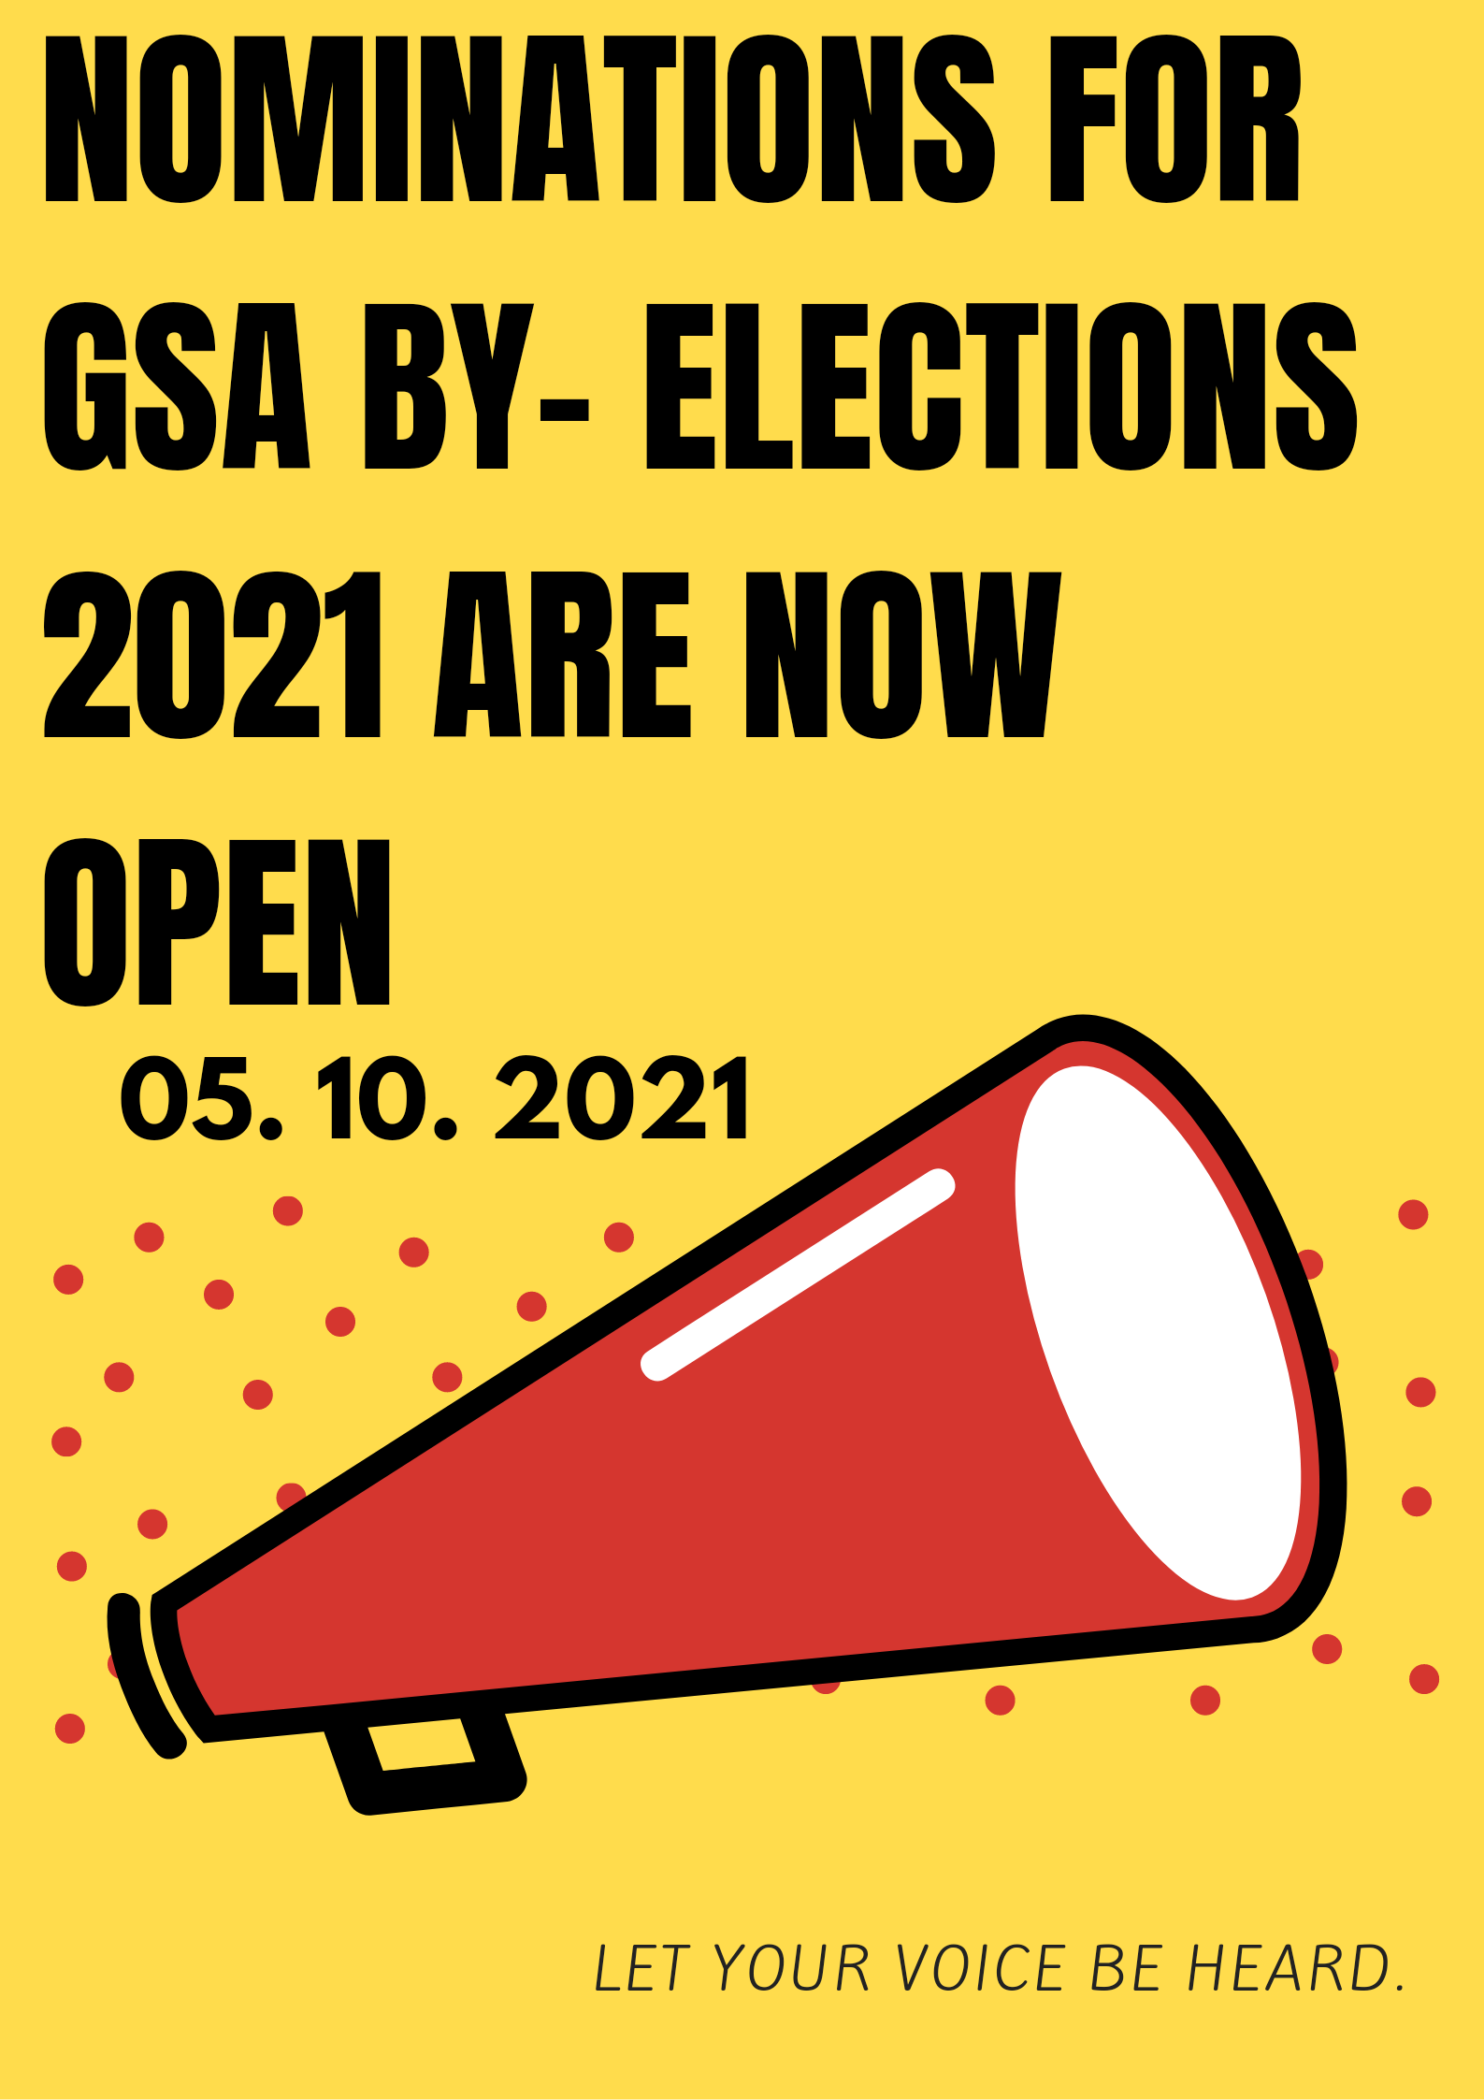 Nominations for GSA By elections are now Open